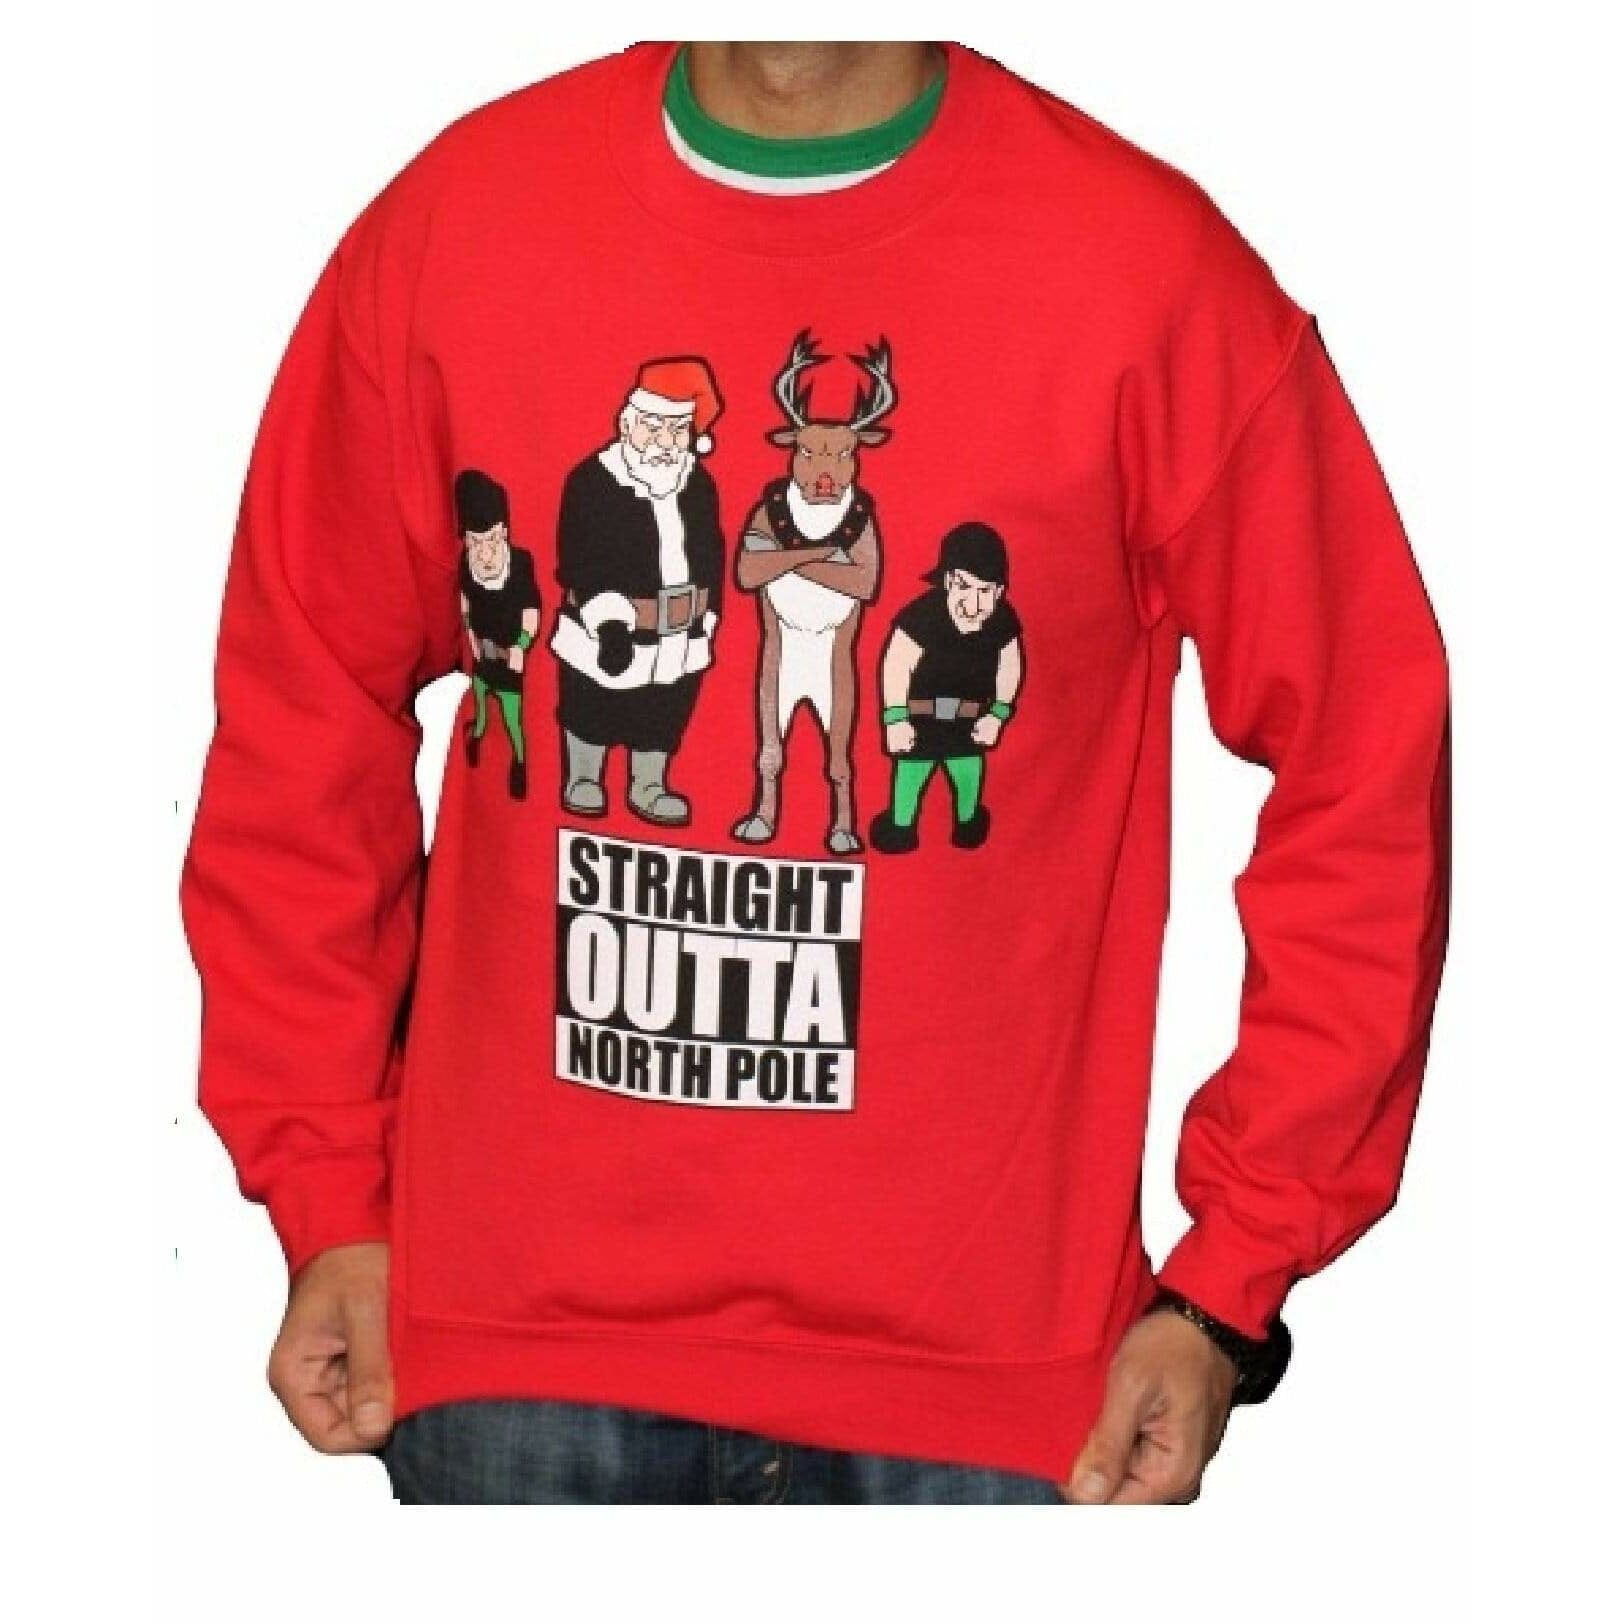 STRAIGHT OUTTA NORTH POLE - Red "Ugly" Christmas Sweaters Snowtorious 